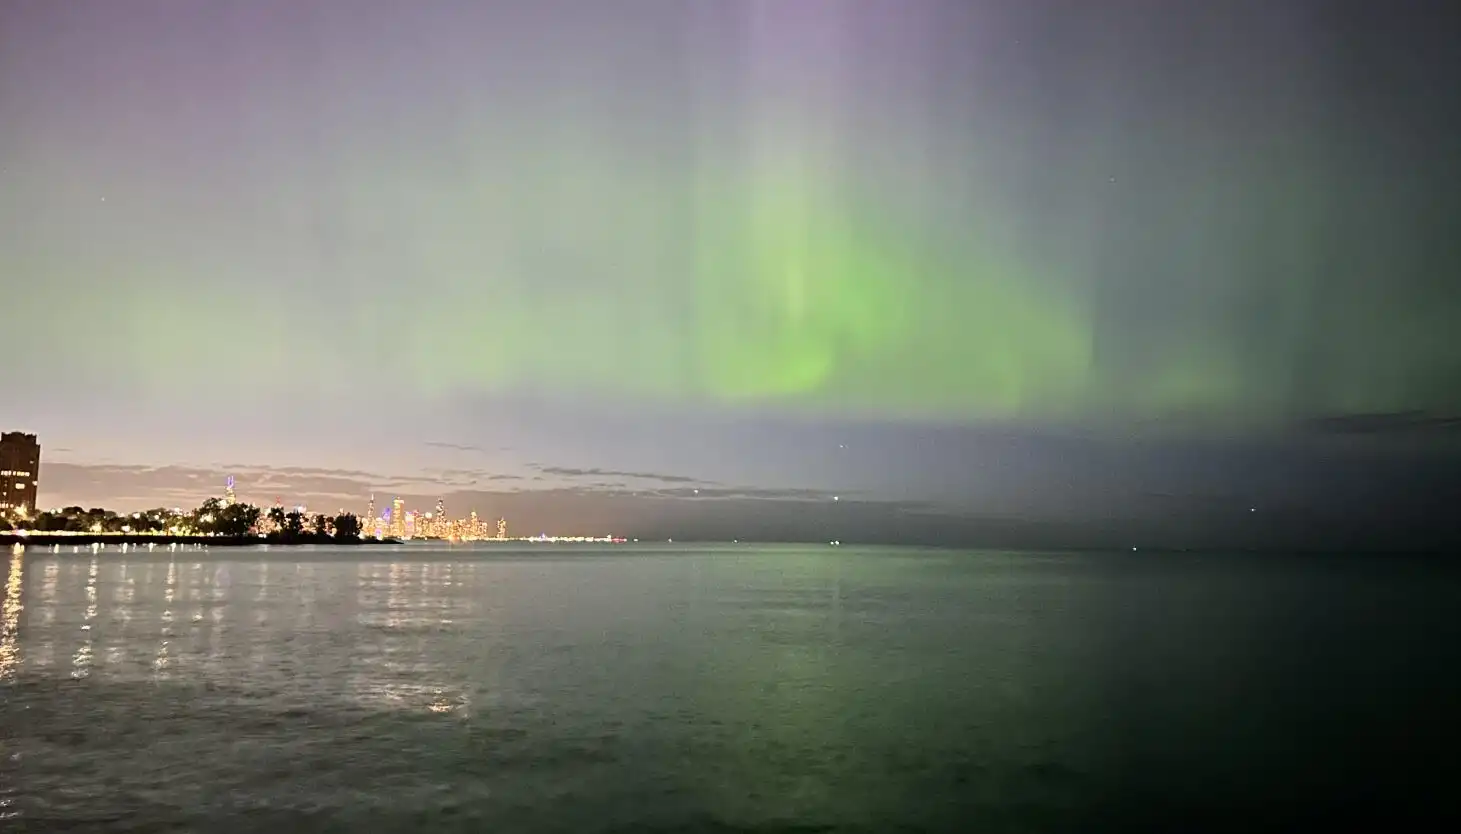 Miss the northern lights in Chicago? Super Bowl of space weather continues tonight, experts say